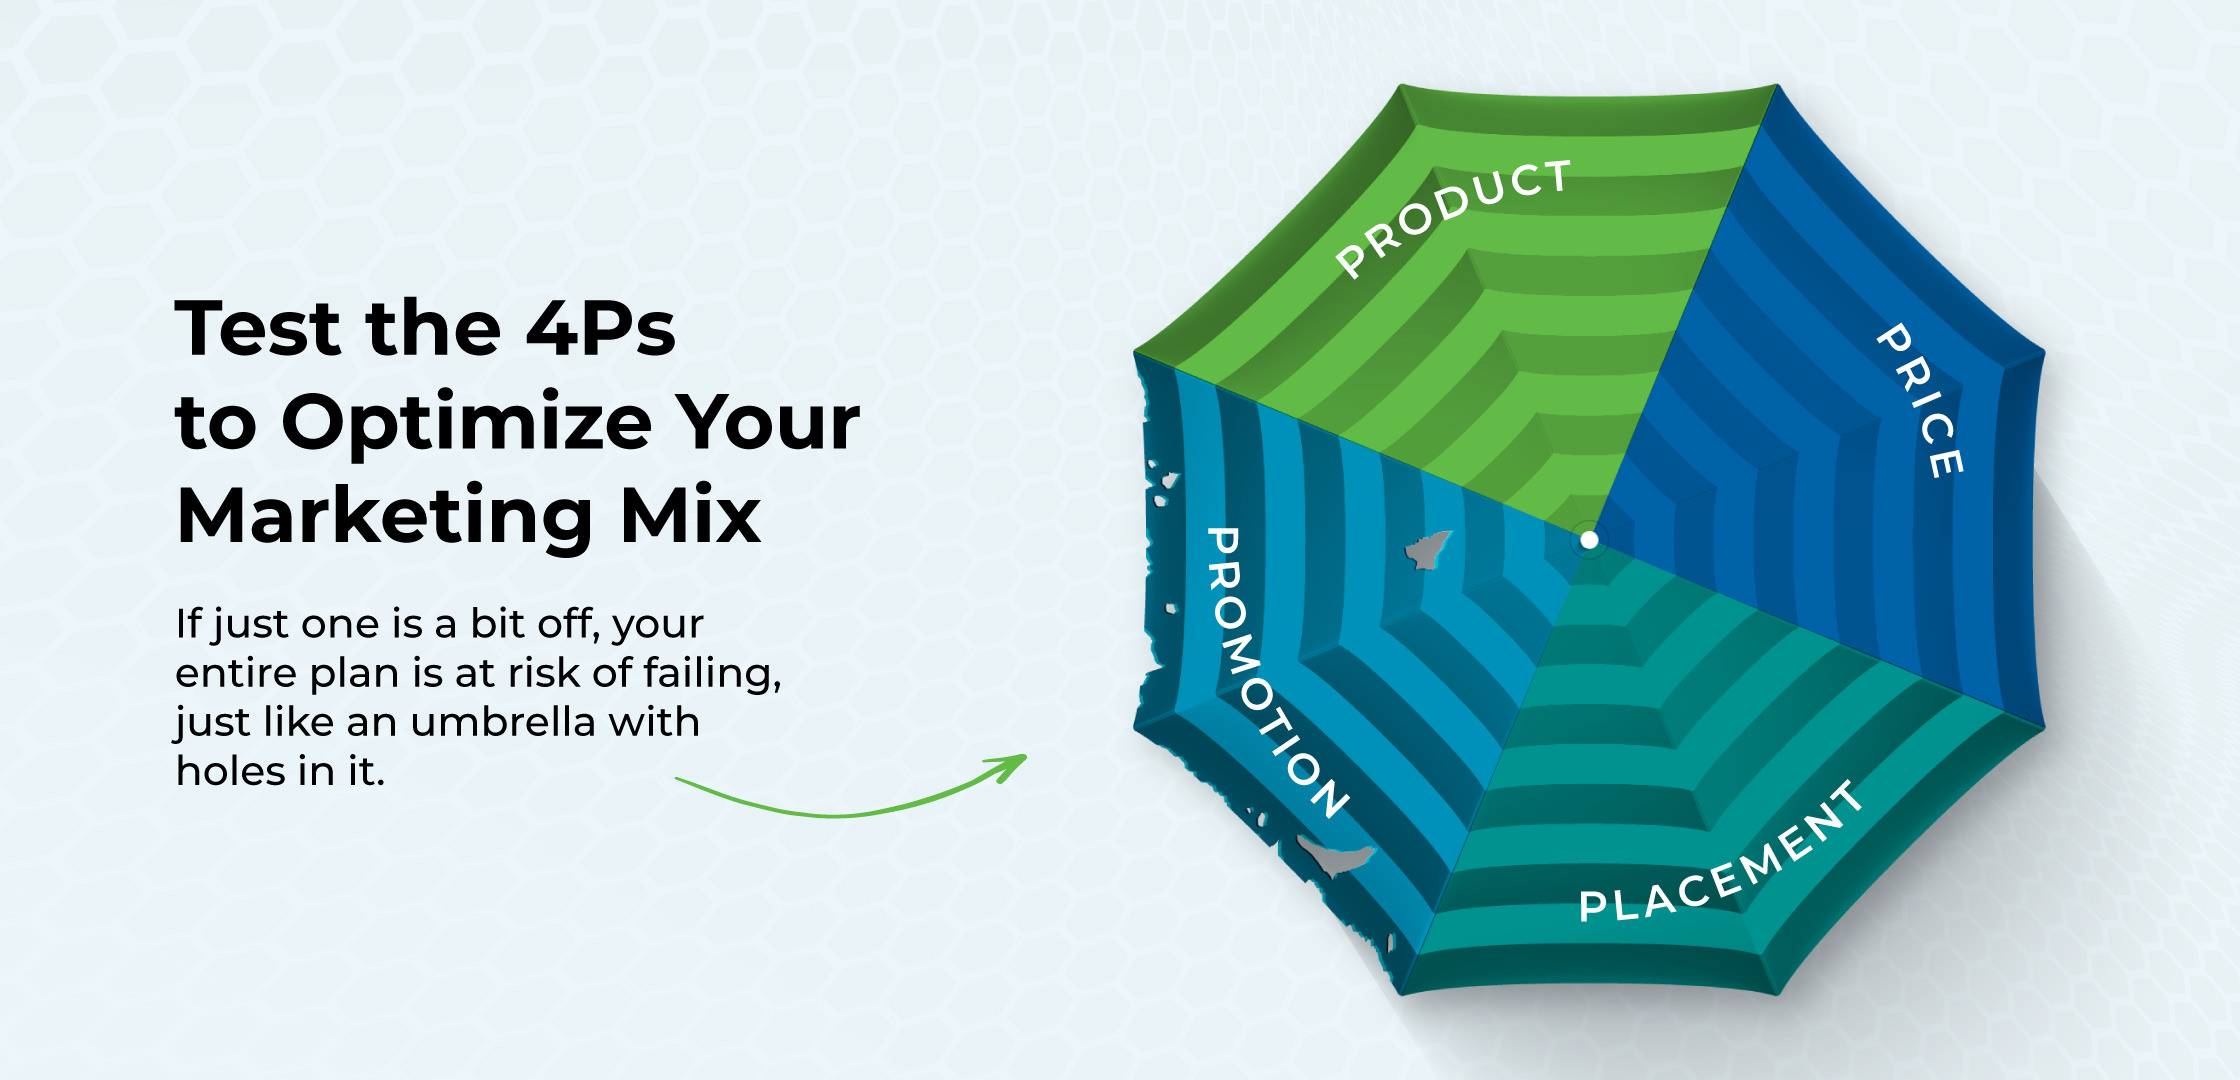 Test the 4Ps to Optimize Your Marketing Mix